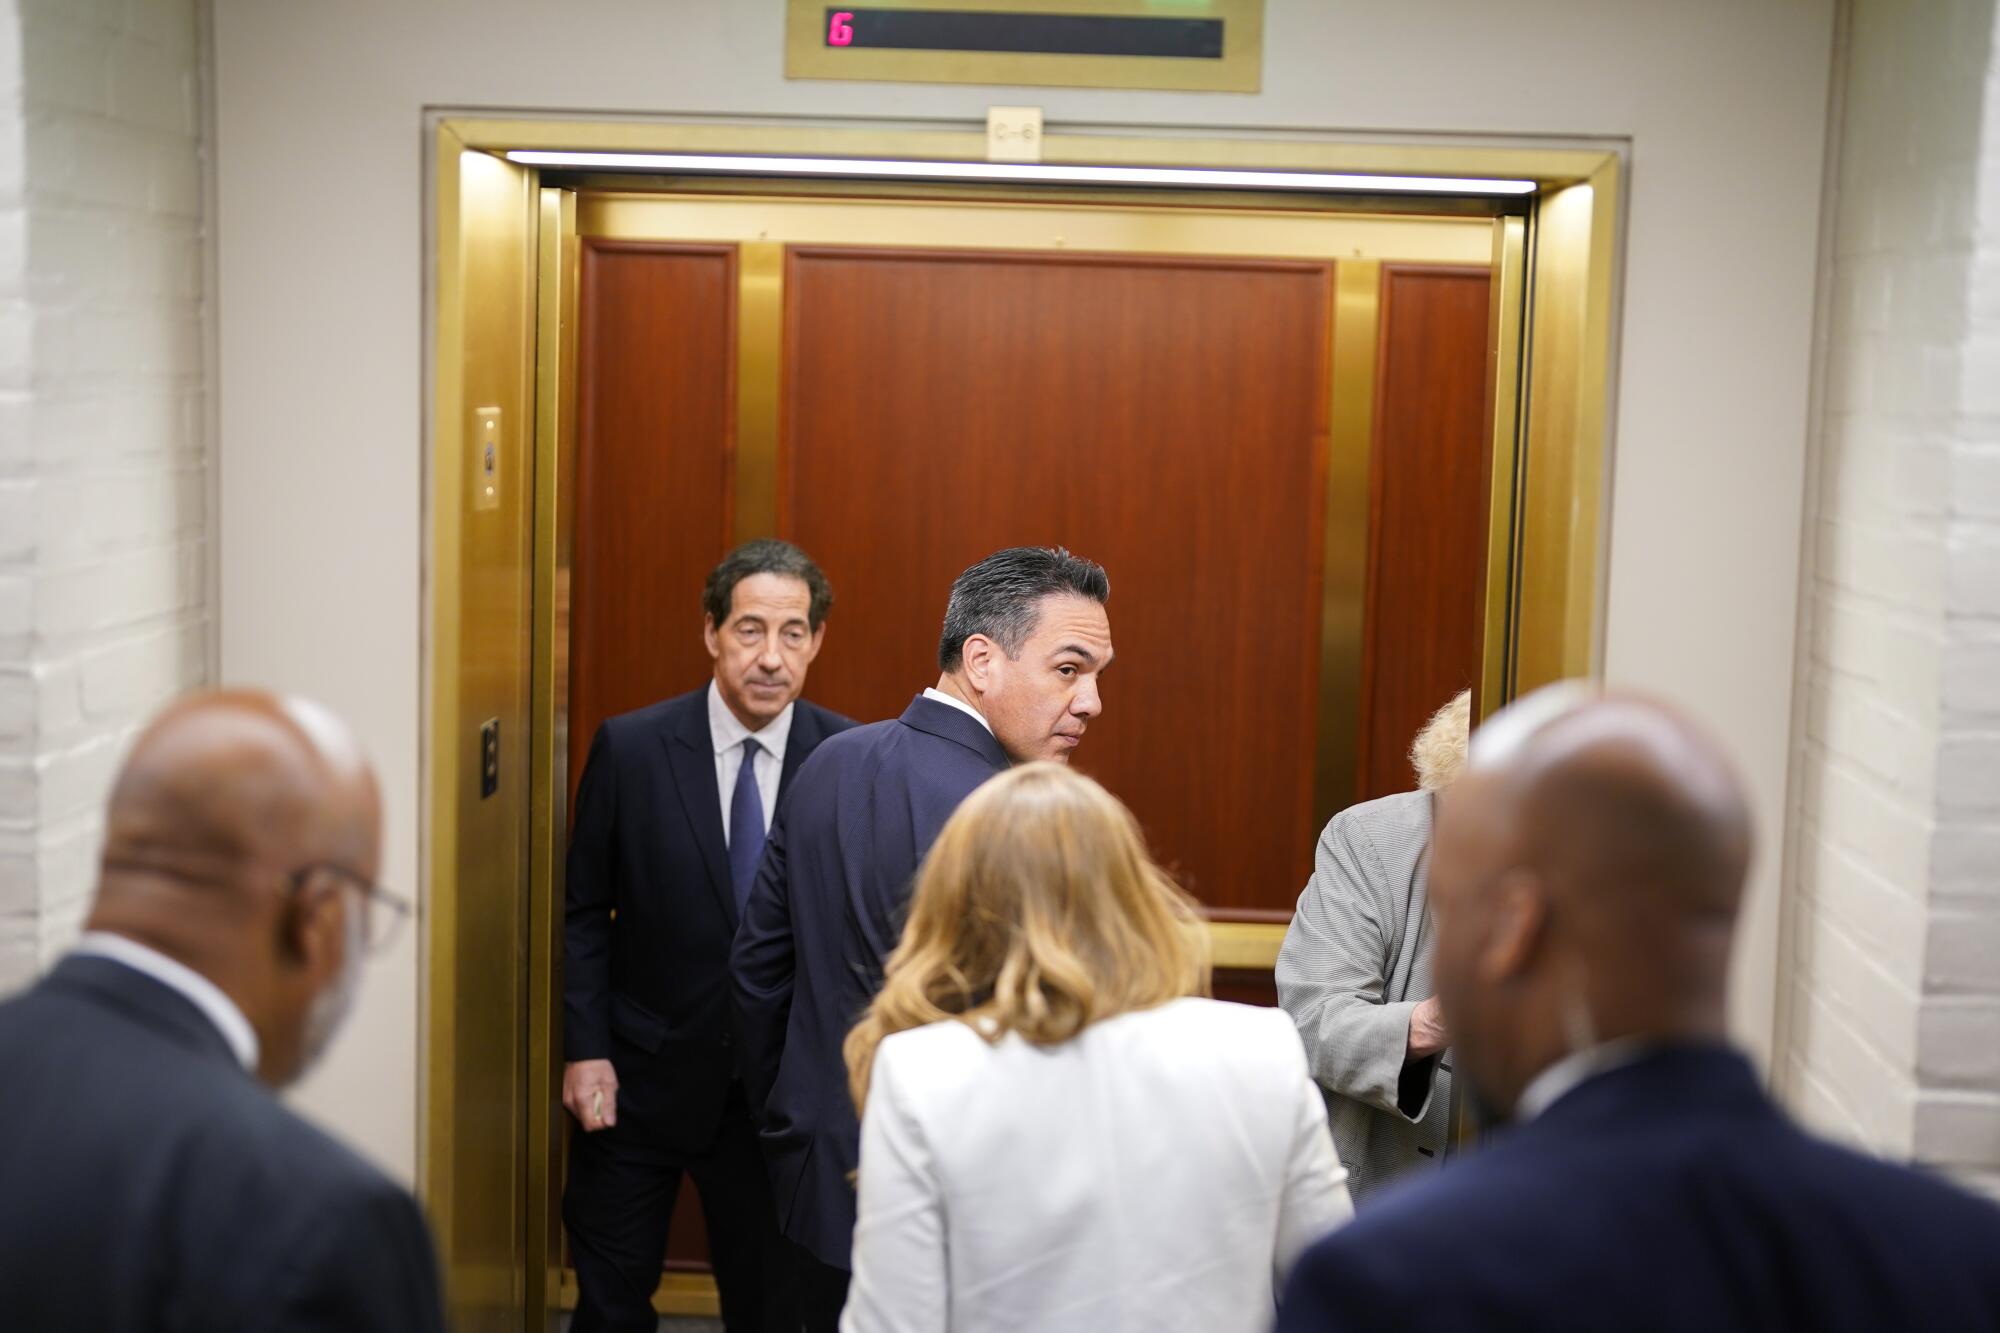 Pete Aguilar, center, and Jamie Raskin, second left, walk into an elevator followed by several other people seen from back